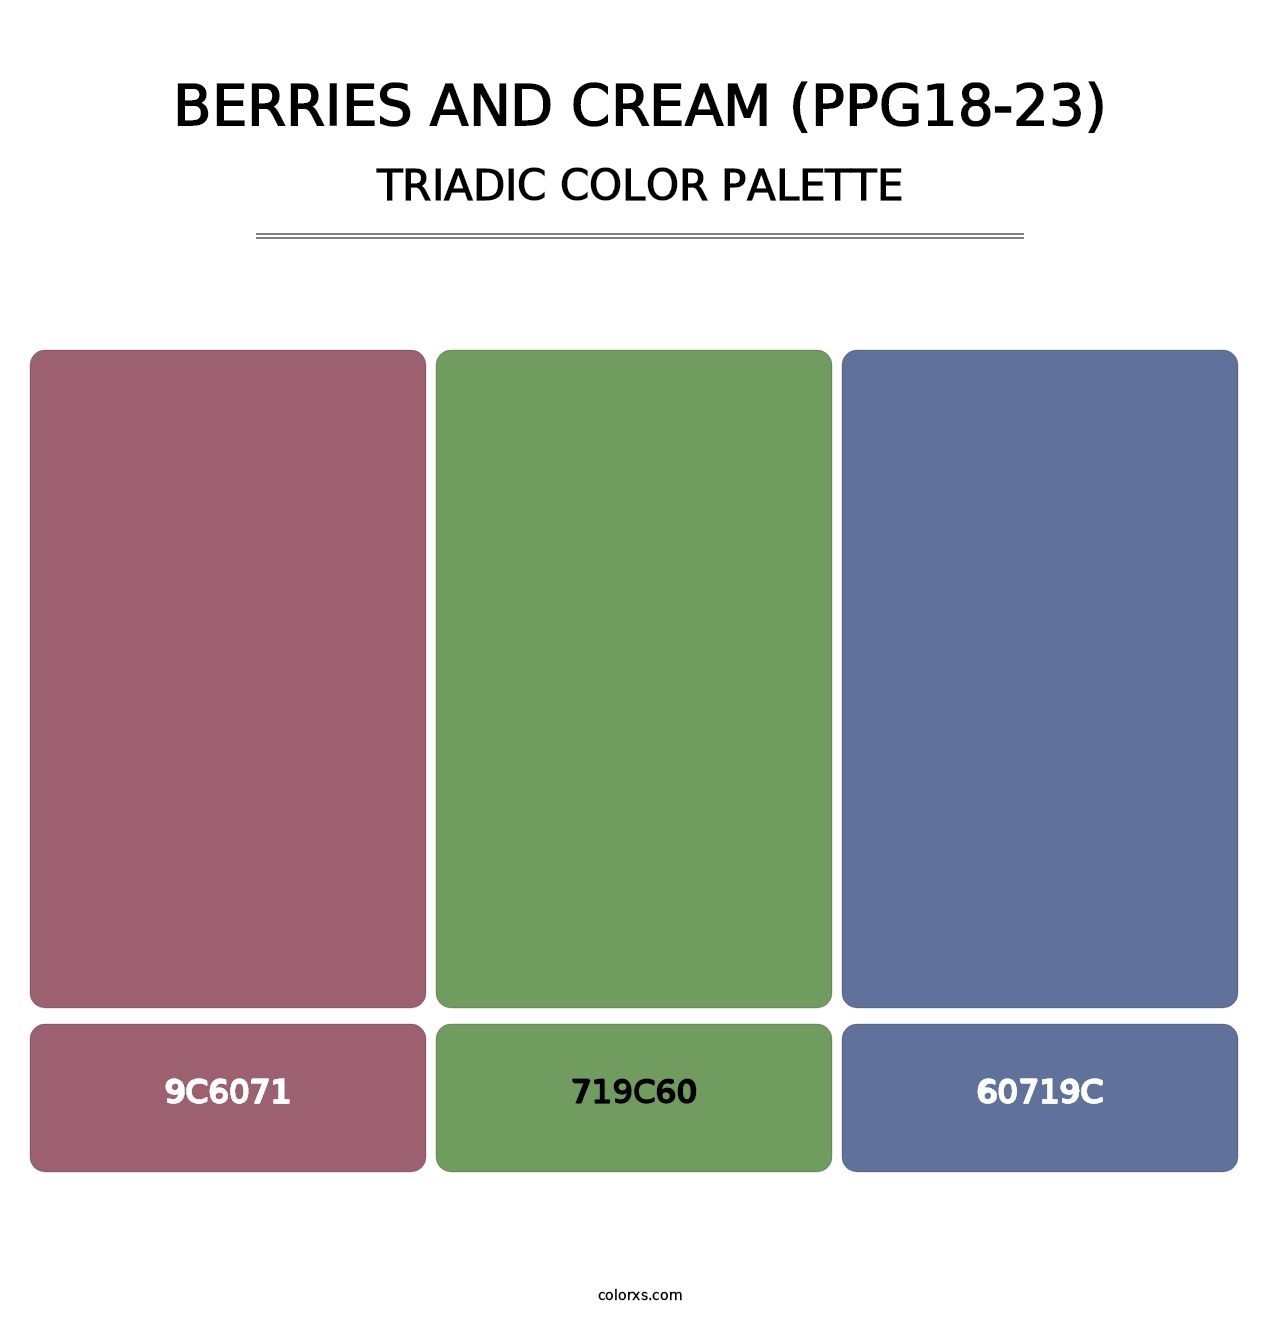 Berries And Cream (PPG18-23) - Triadic Color Palette